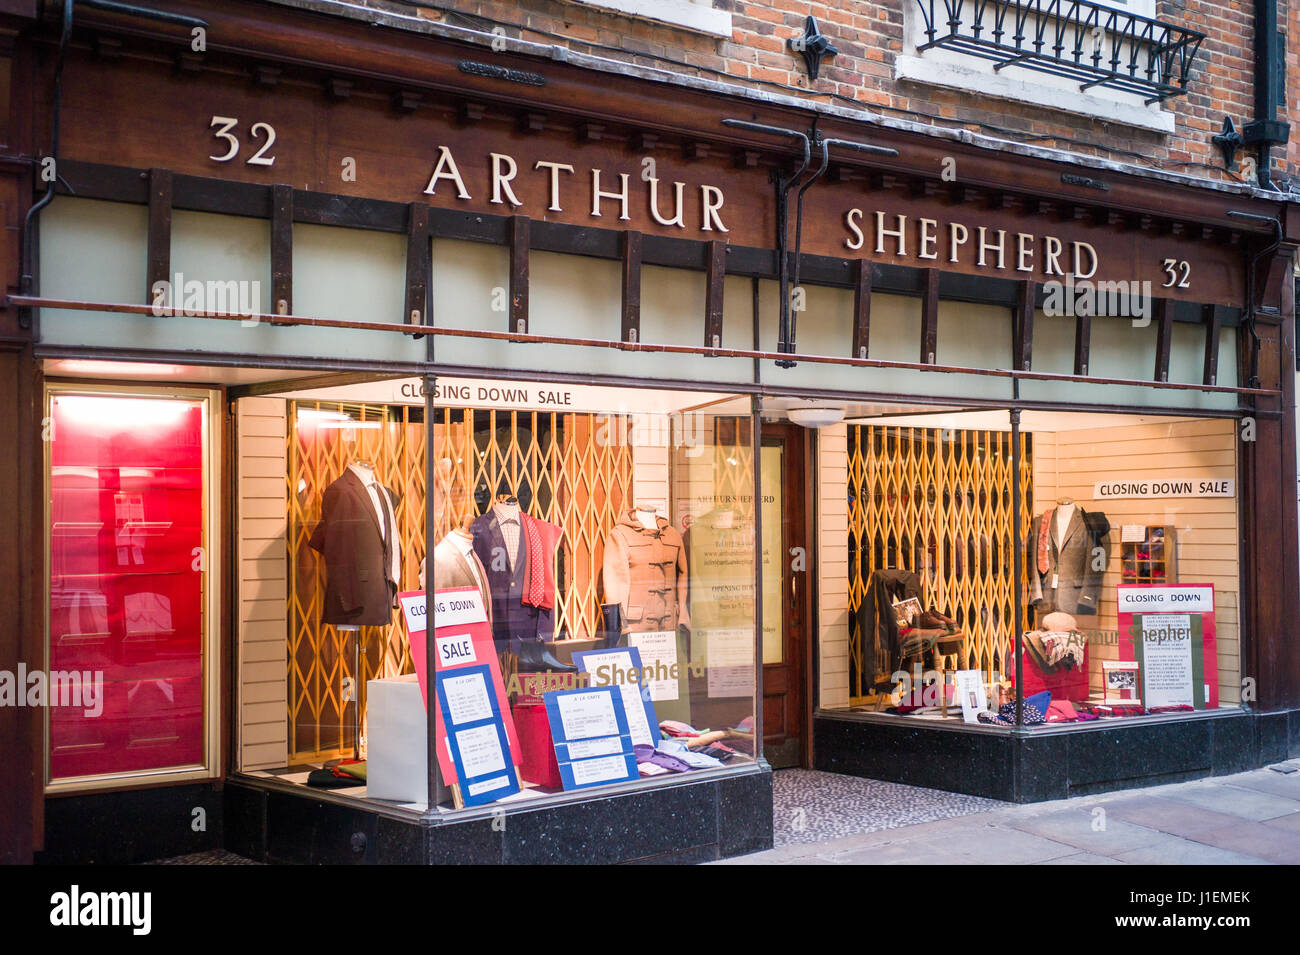 Arthur Shepherd, traditional clothes shop, closing down due to retirement. The shop is based in Trinity Lane in the historic centre of Cambridge UK. Stock Photo